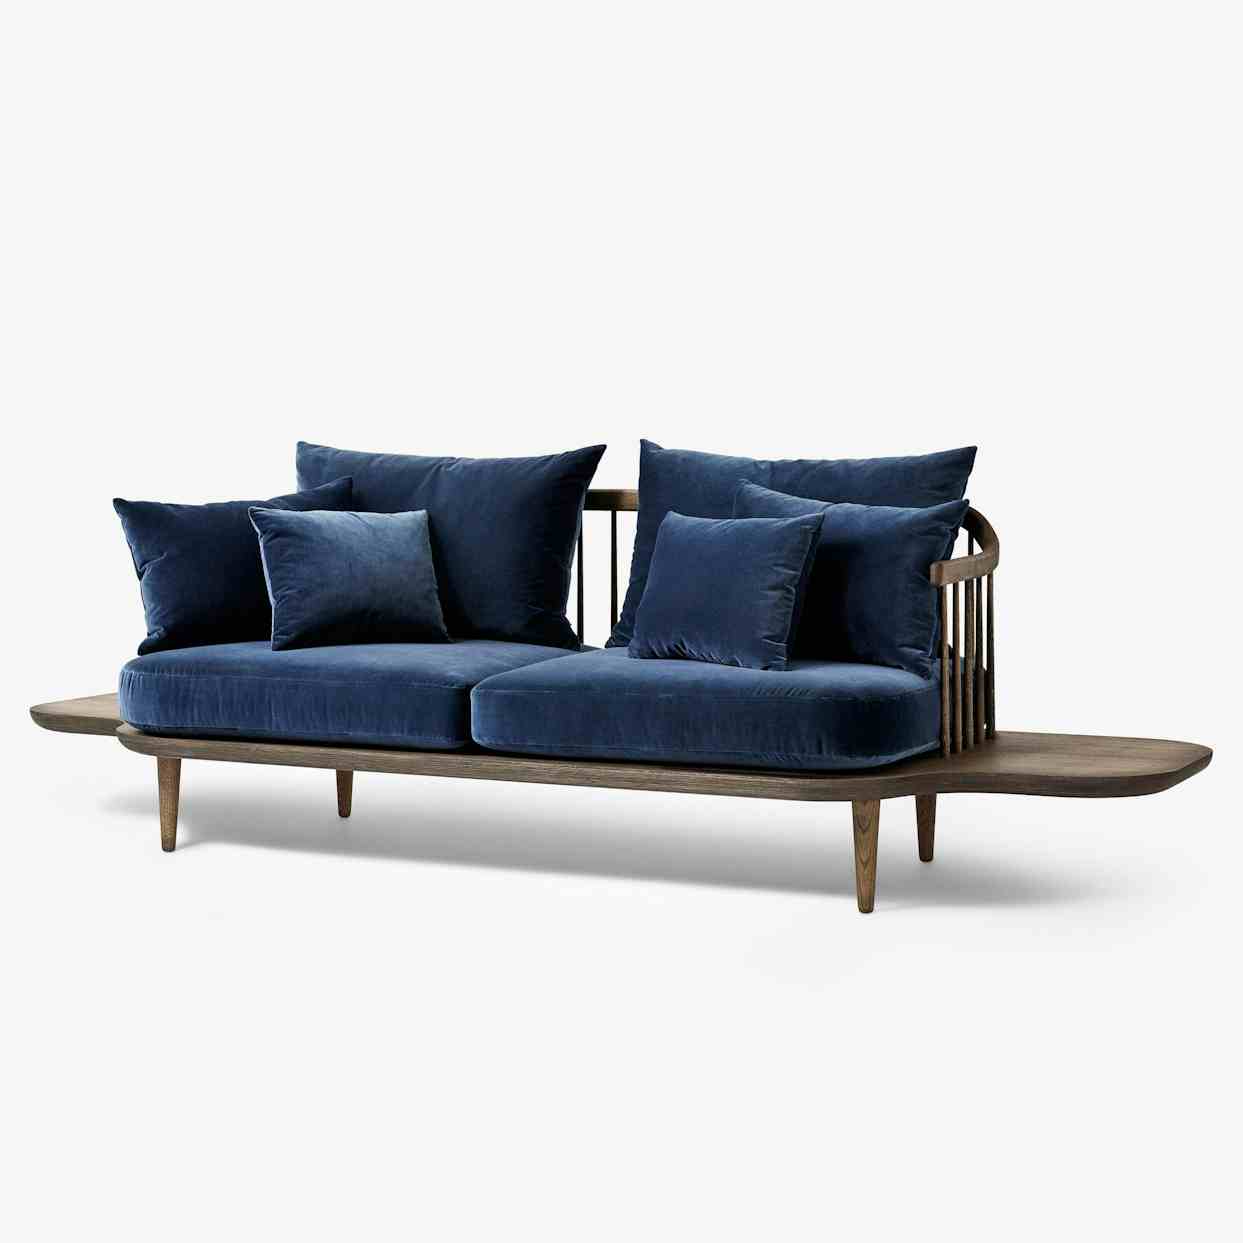 Tradition Fly Sofa Armrests Blue Angle Haute Living Copy